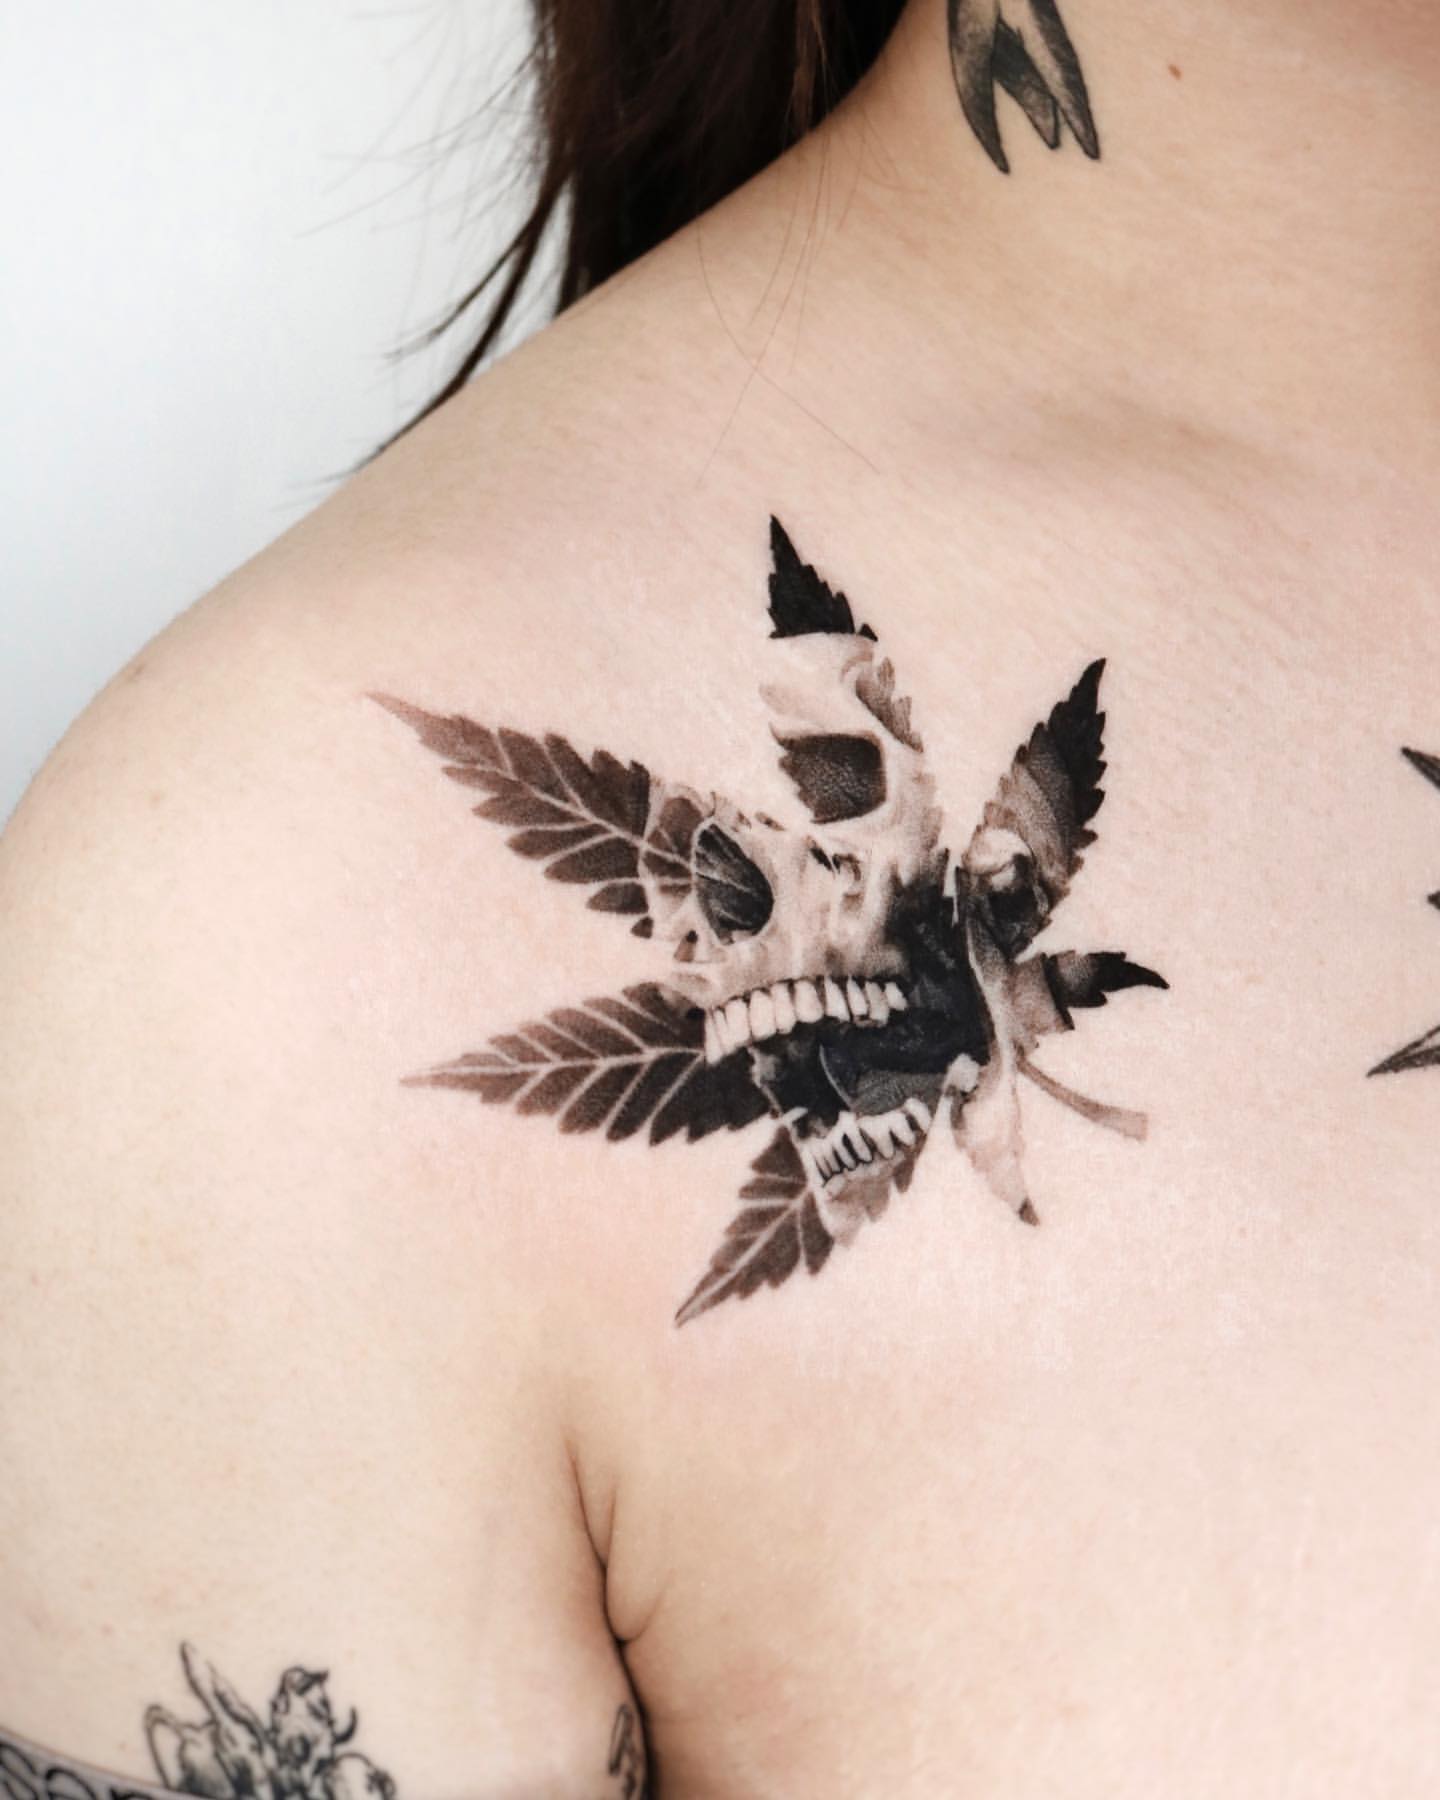 10 Weed Leaf Tattoo Ideas You Have To See To believe  alexie